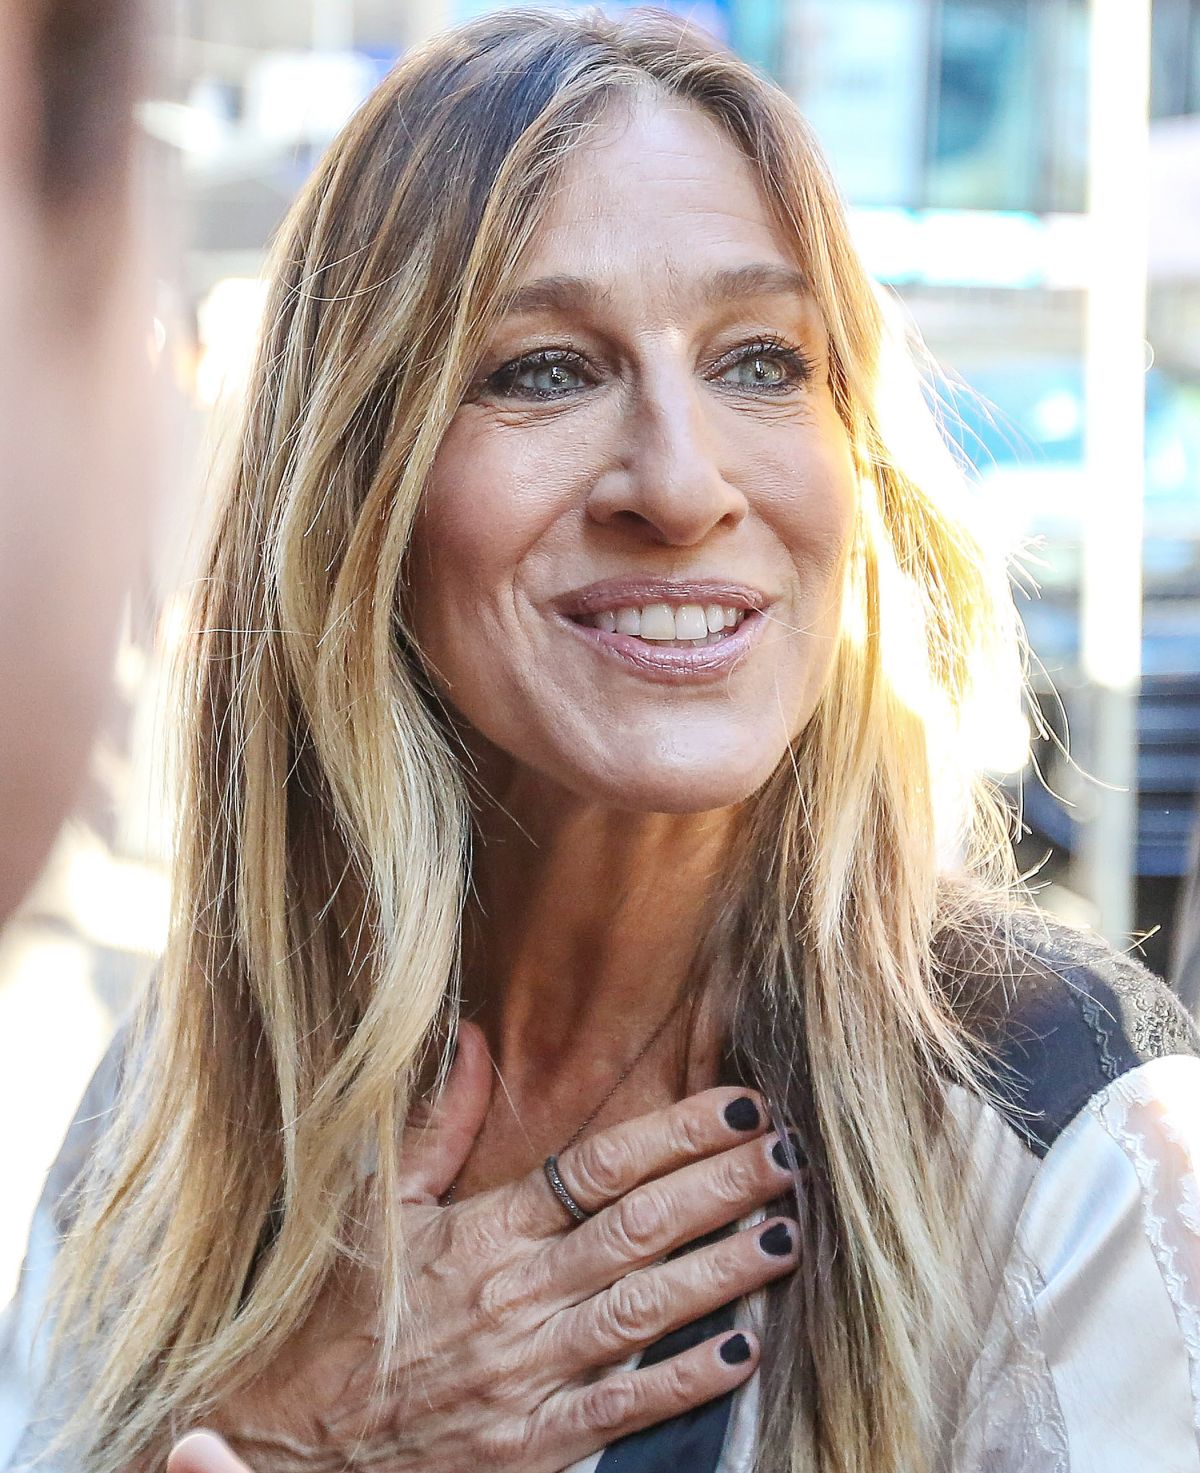 All 100+ Images pictures of sarah jessica parker Latest